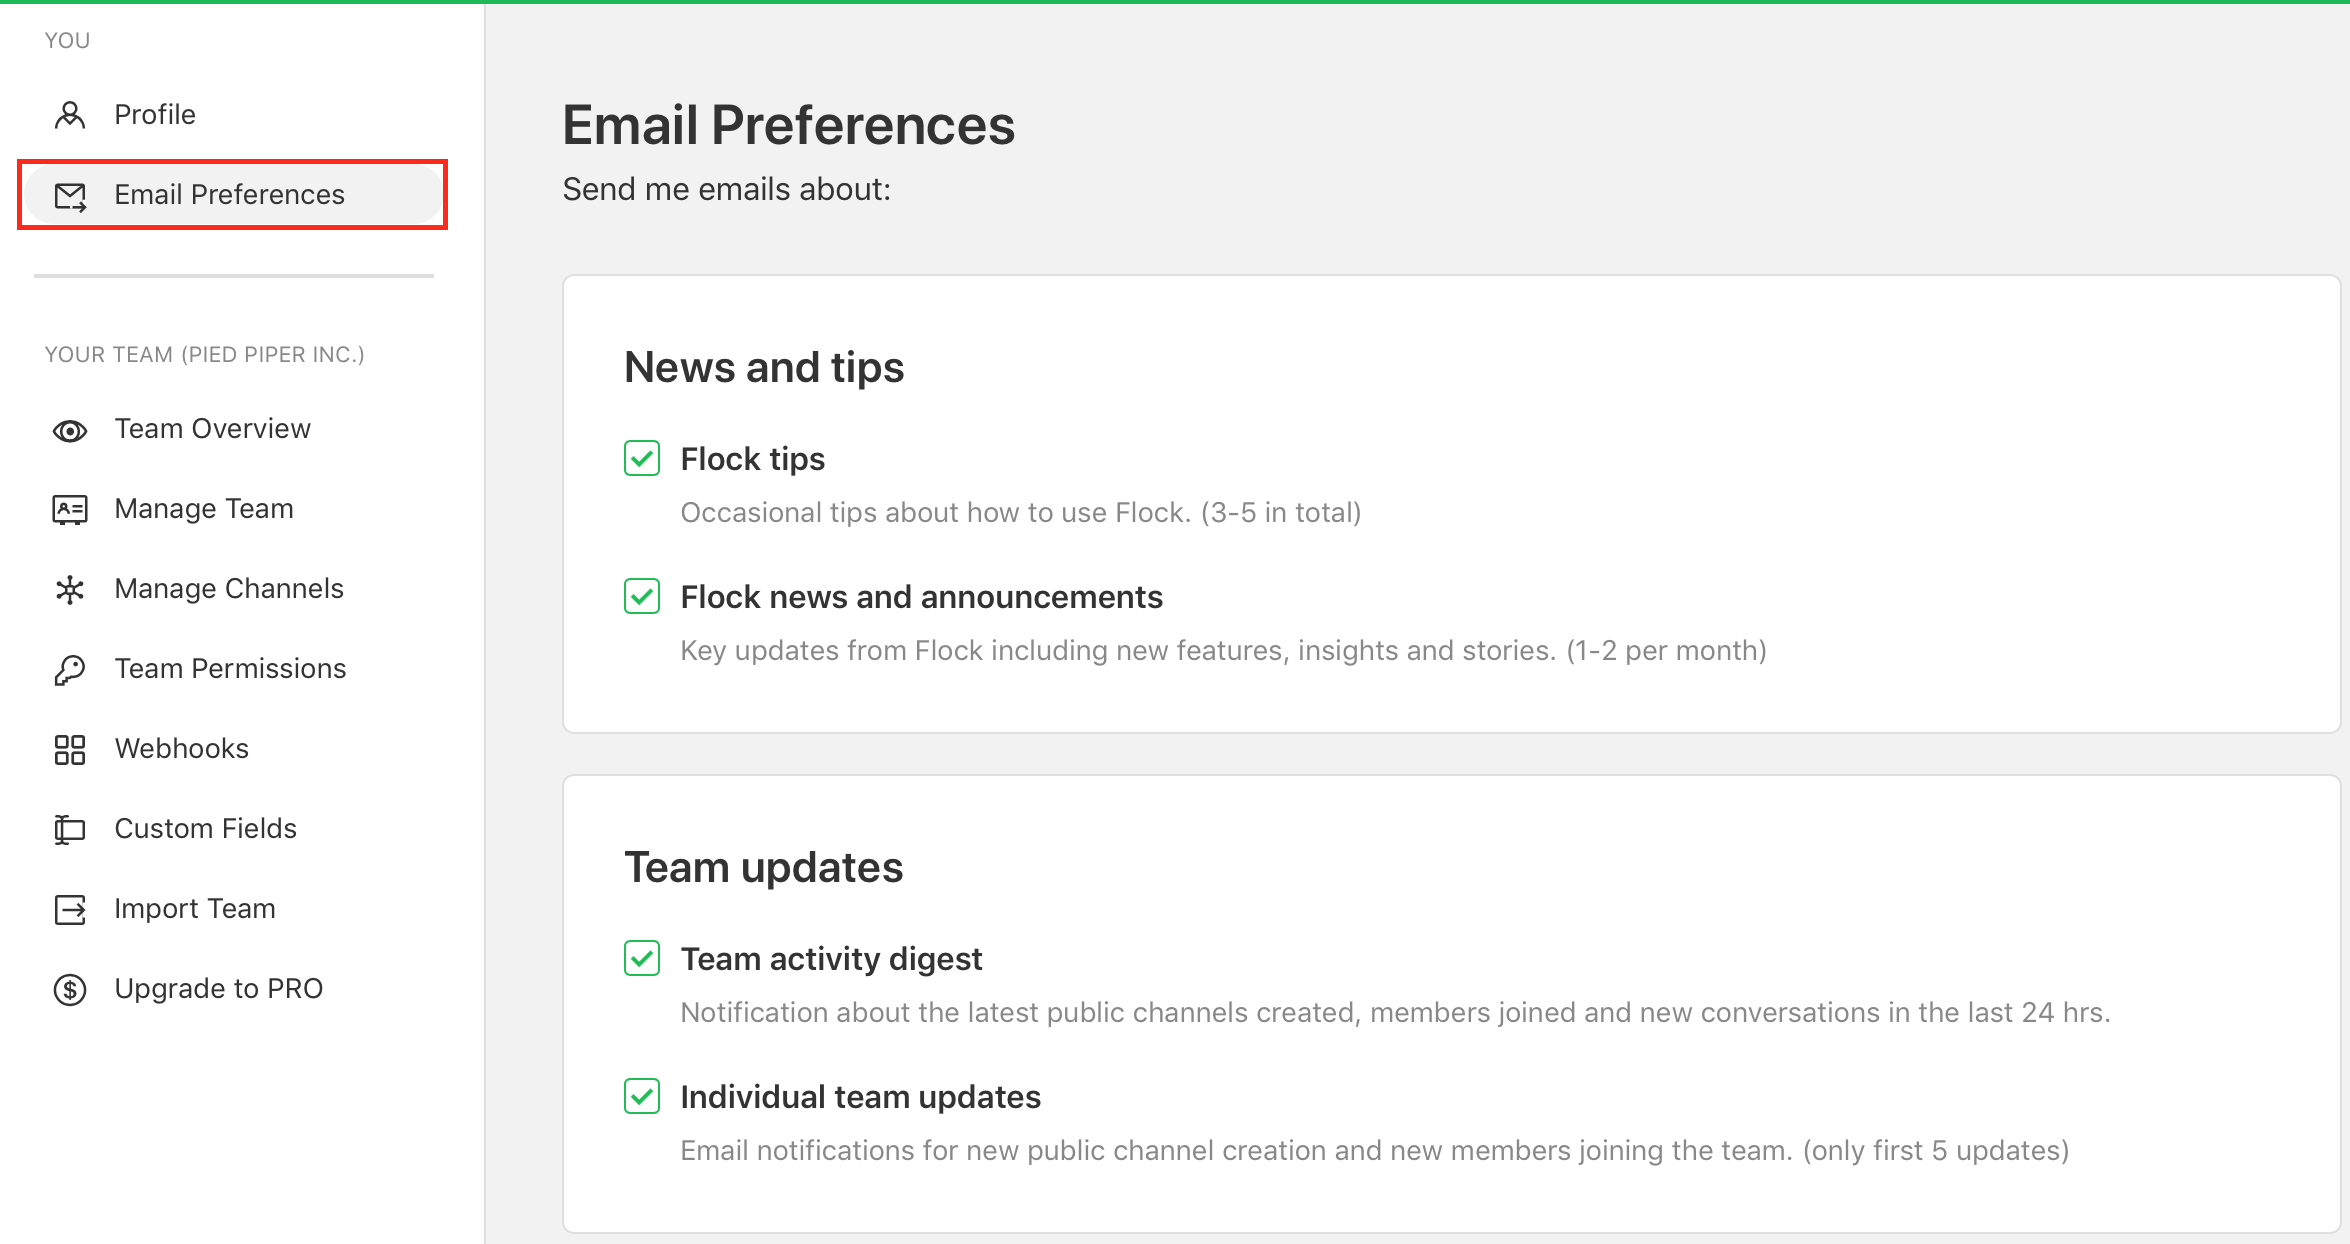 2_Email_Preferences.png